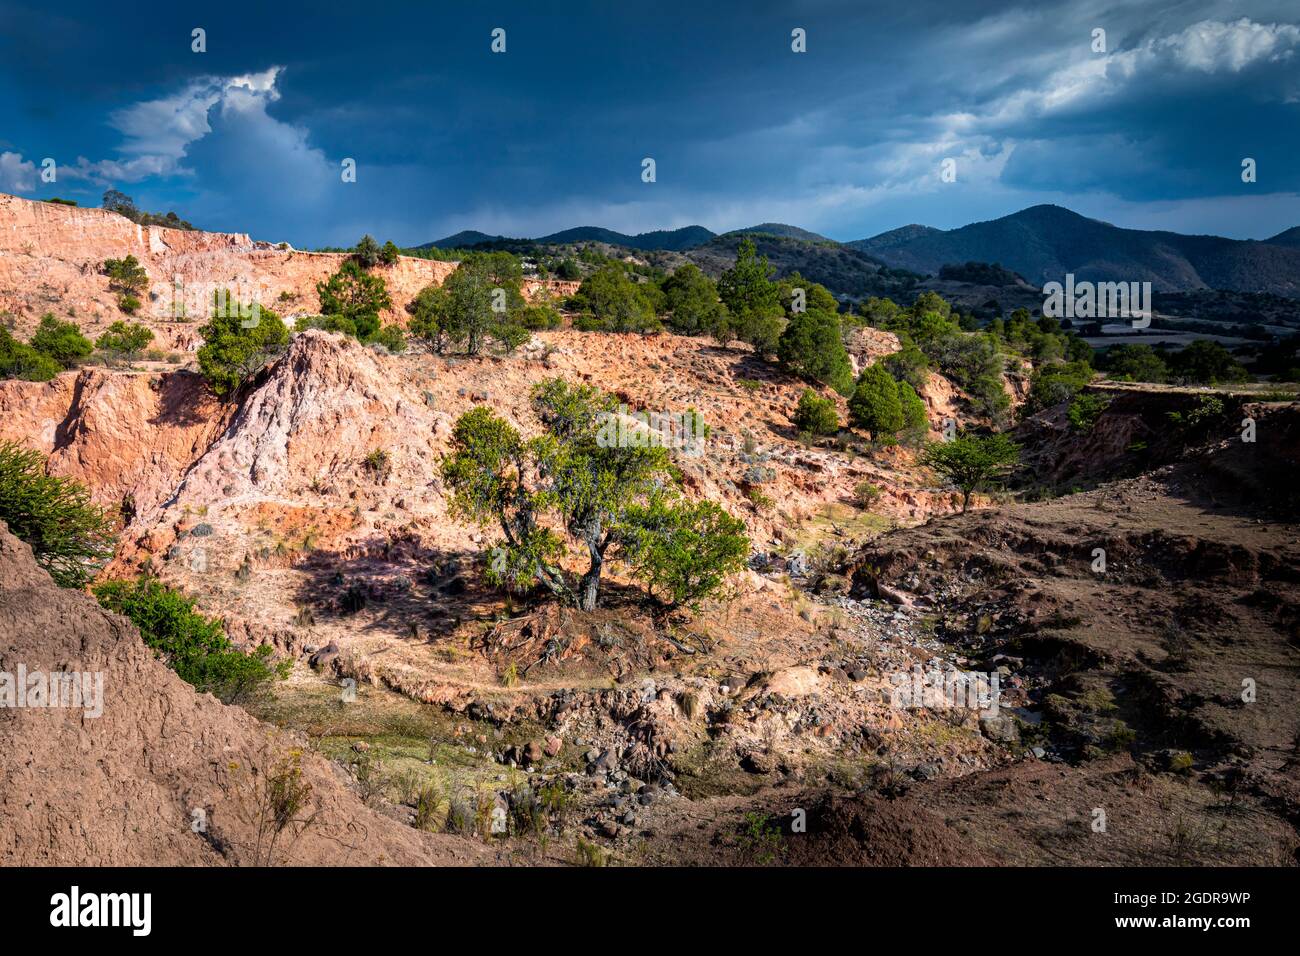 A tree near a creek bed complements the red soil landscape near Yanhuitlan, Oaxaca, Mexico. Stock Photo